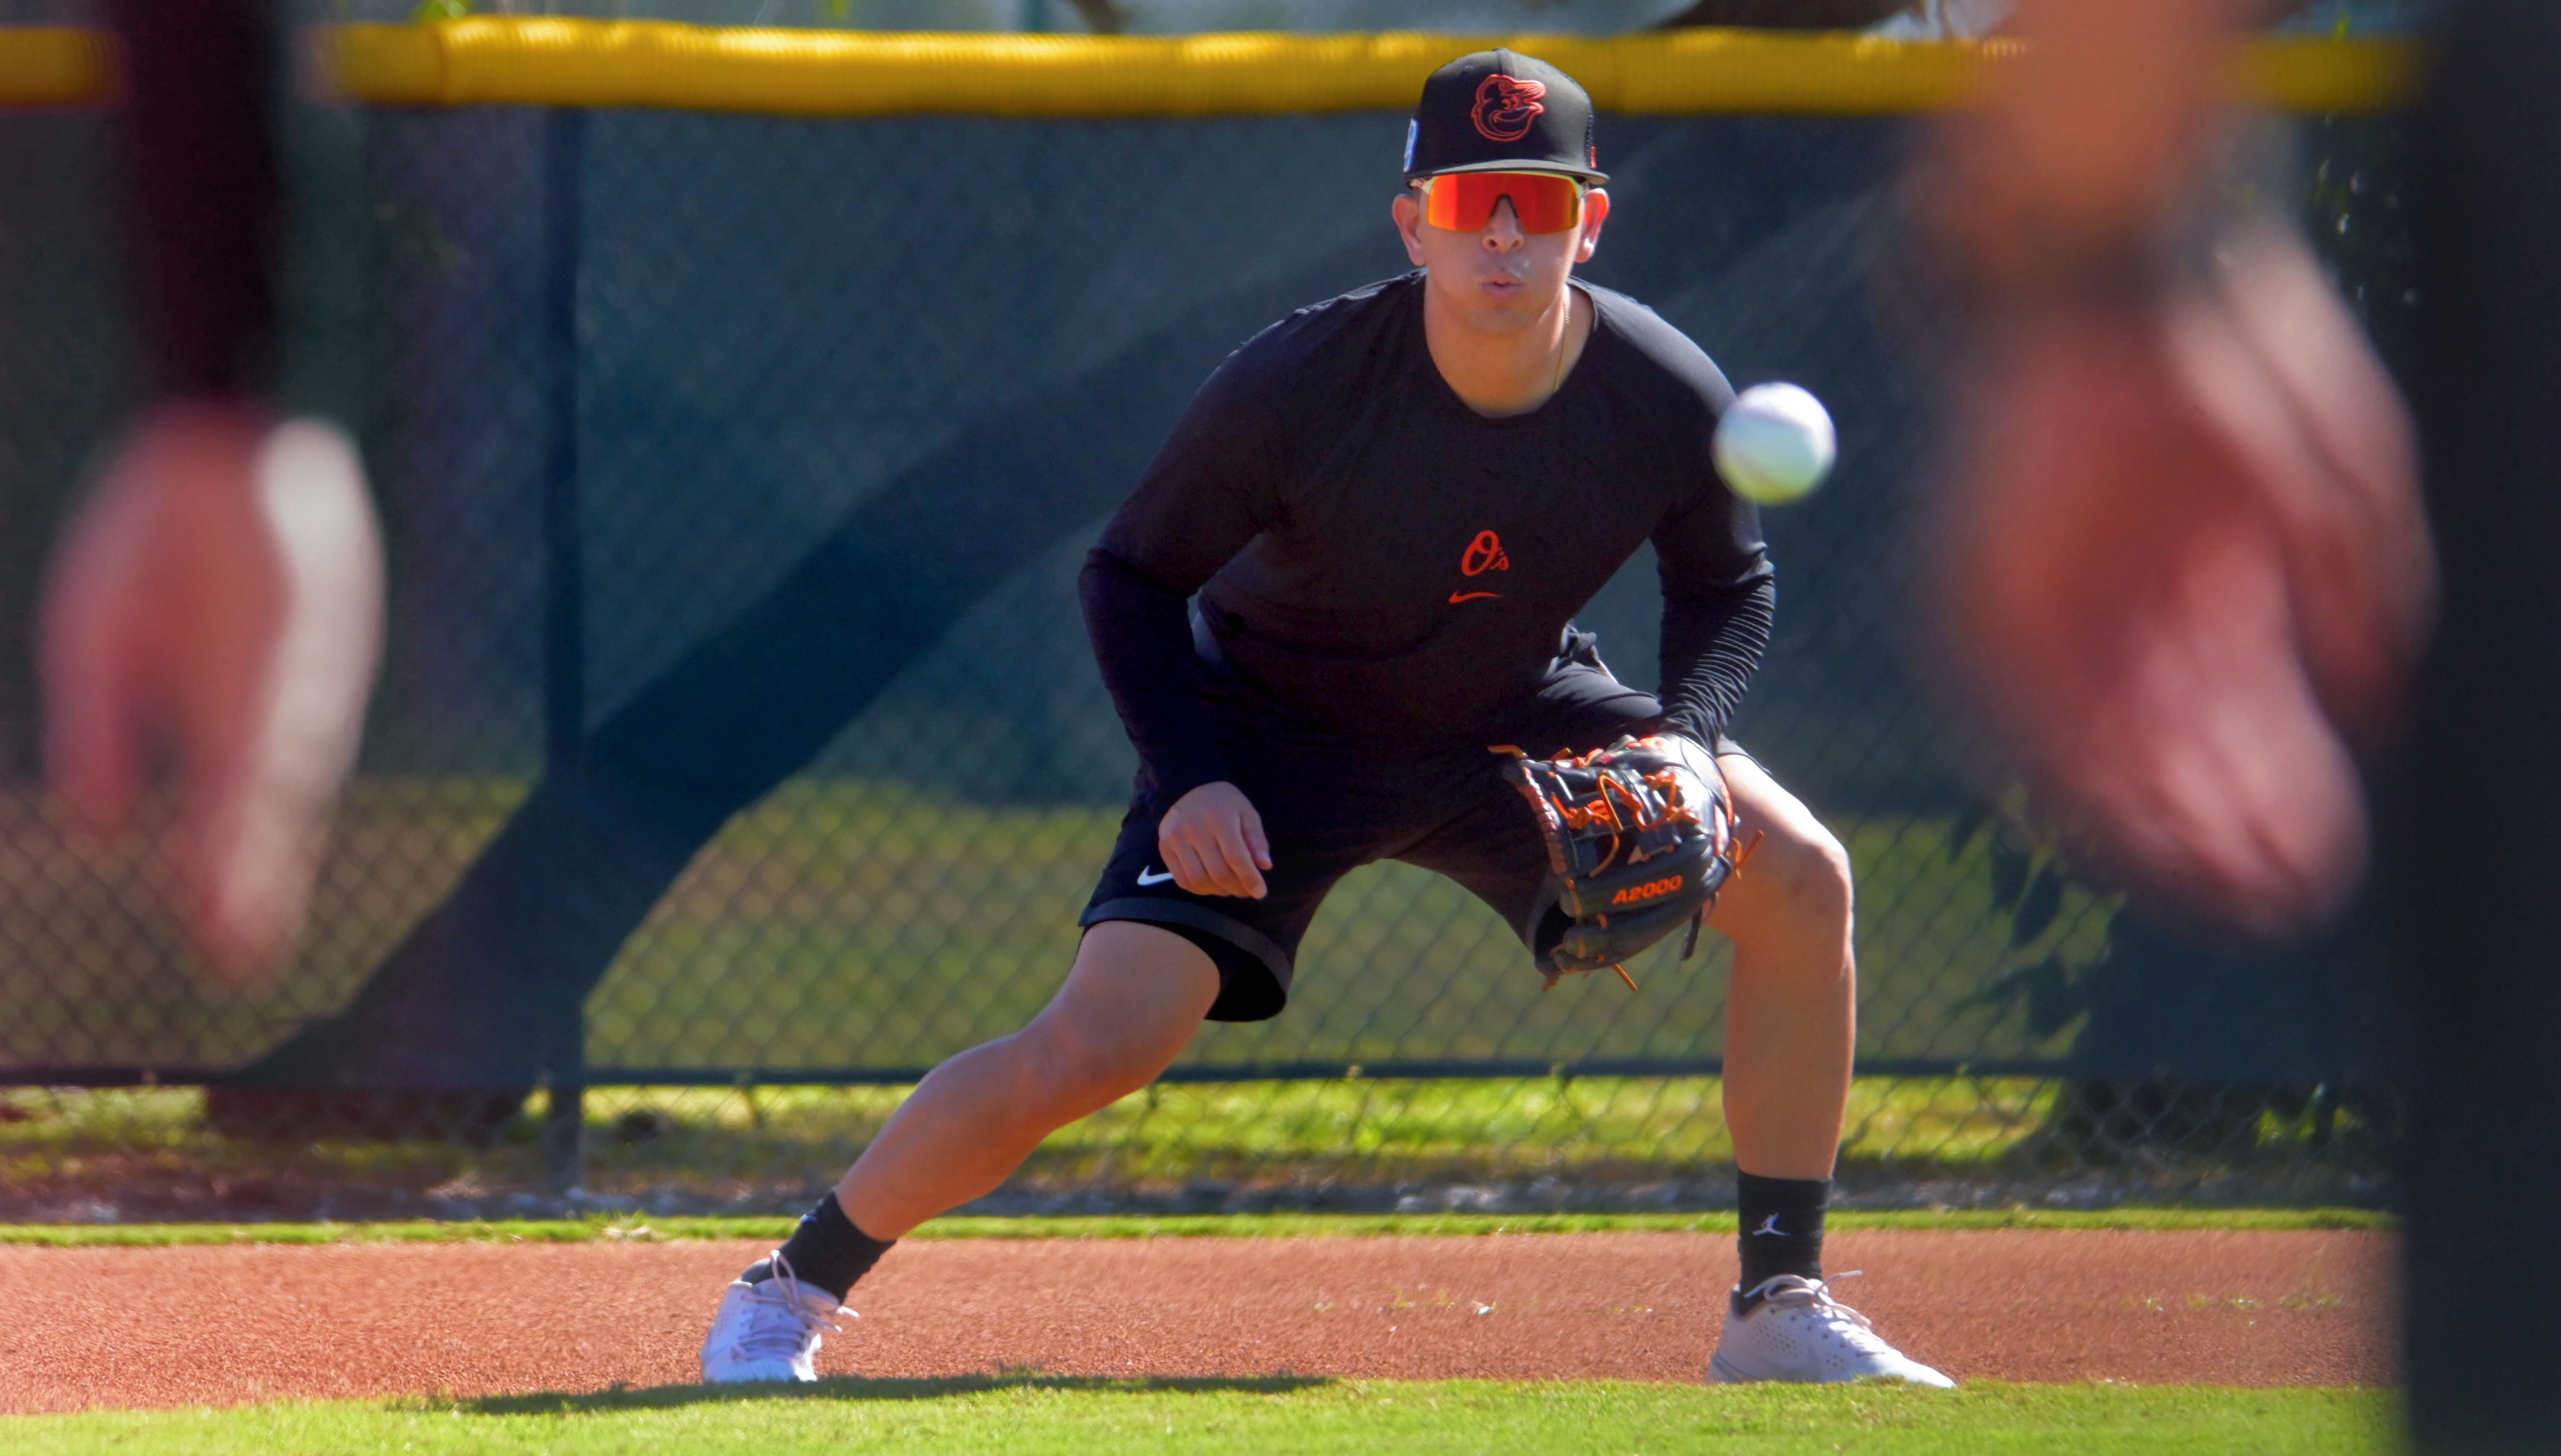 Orioles spring training is underway. Here's what you need to know.